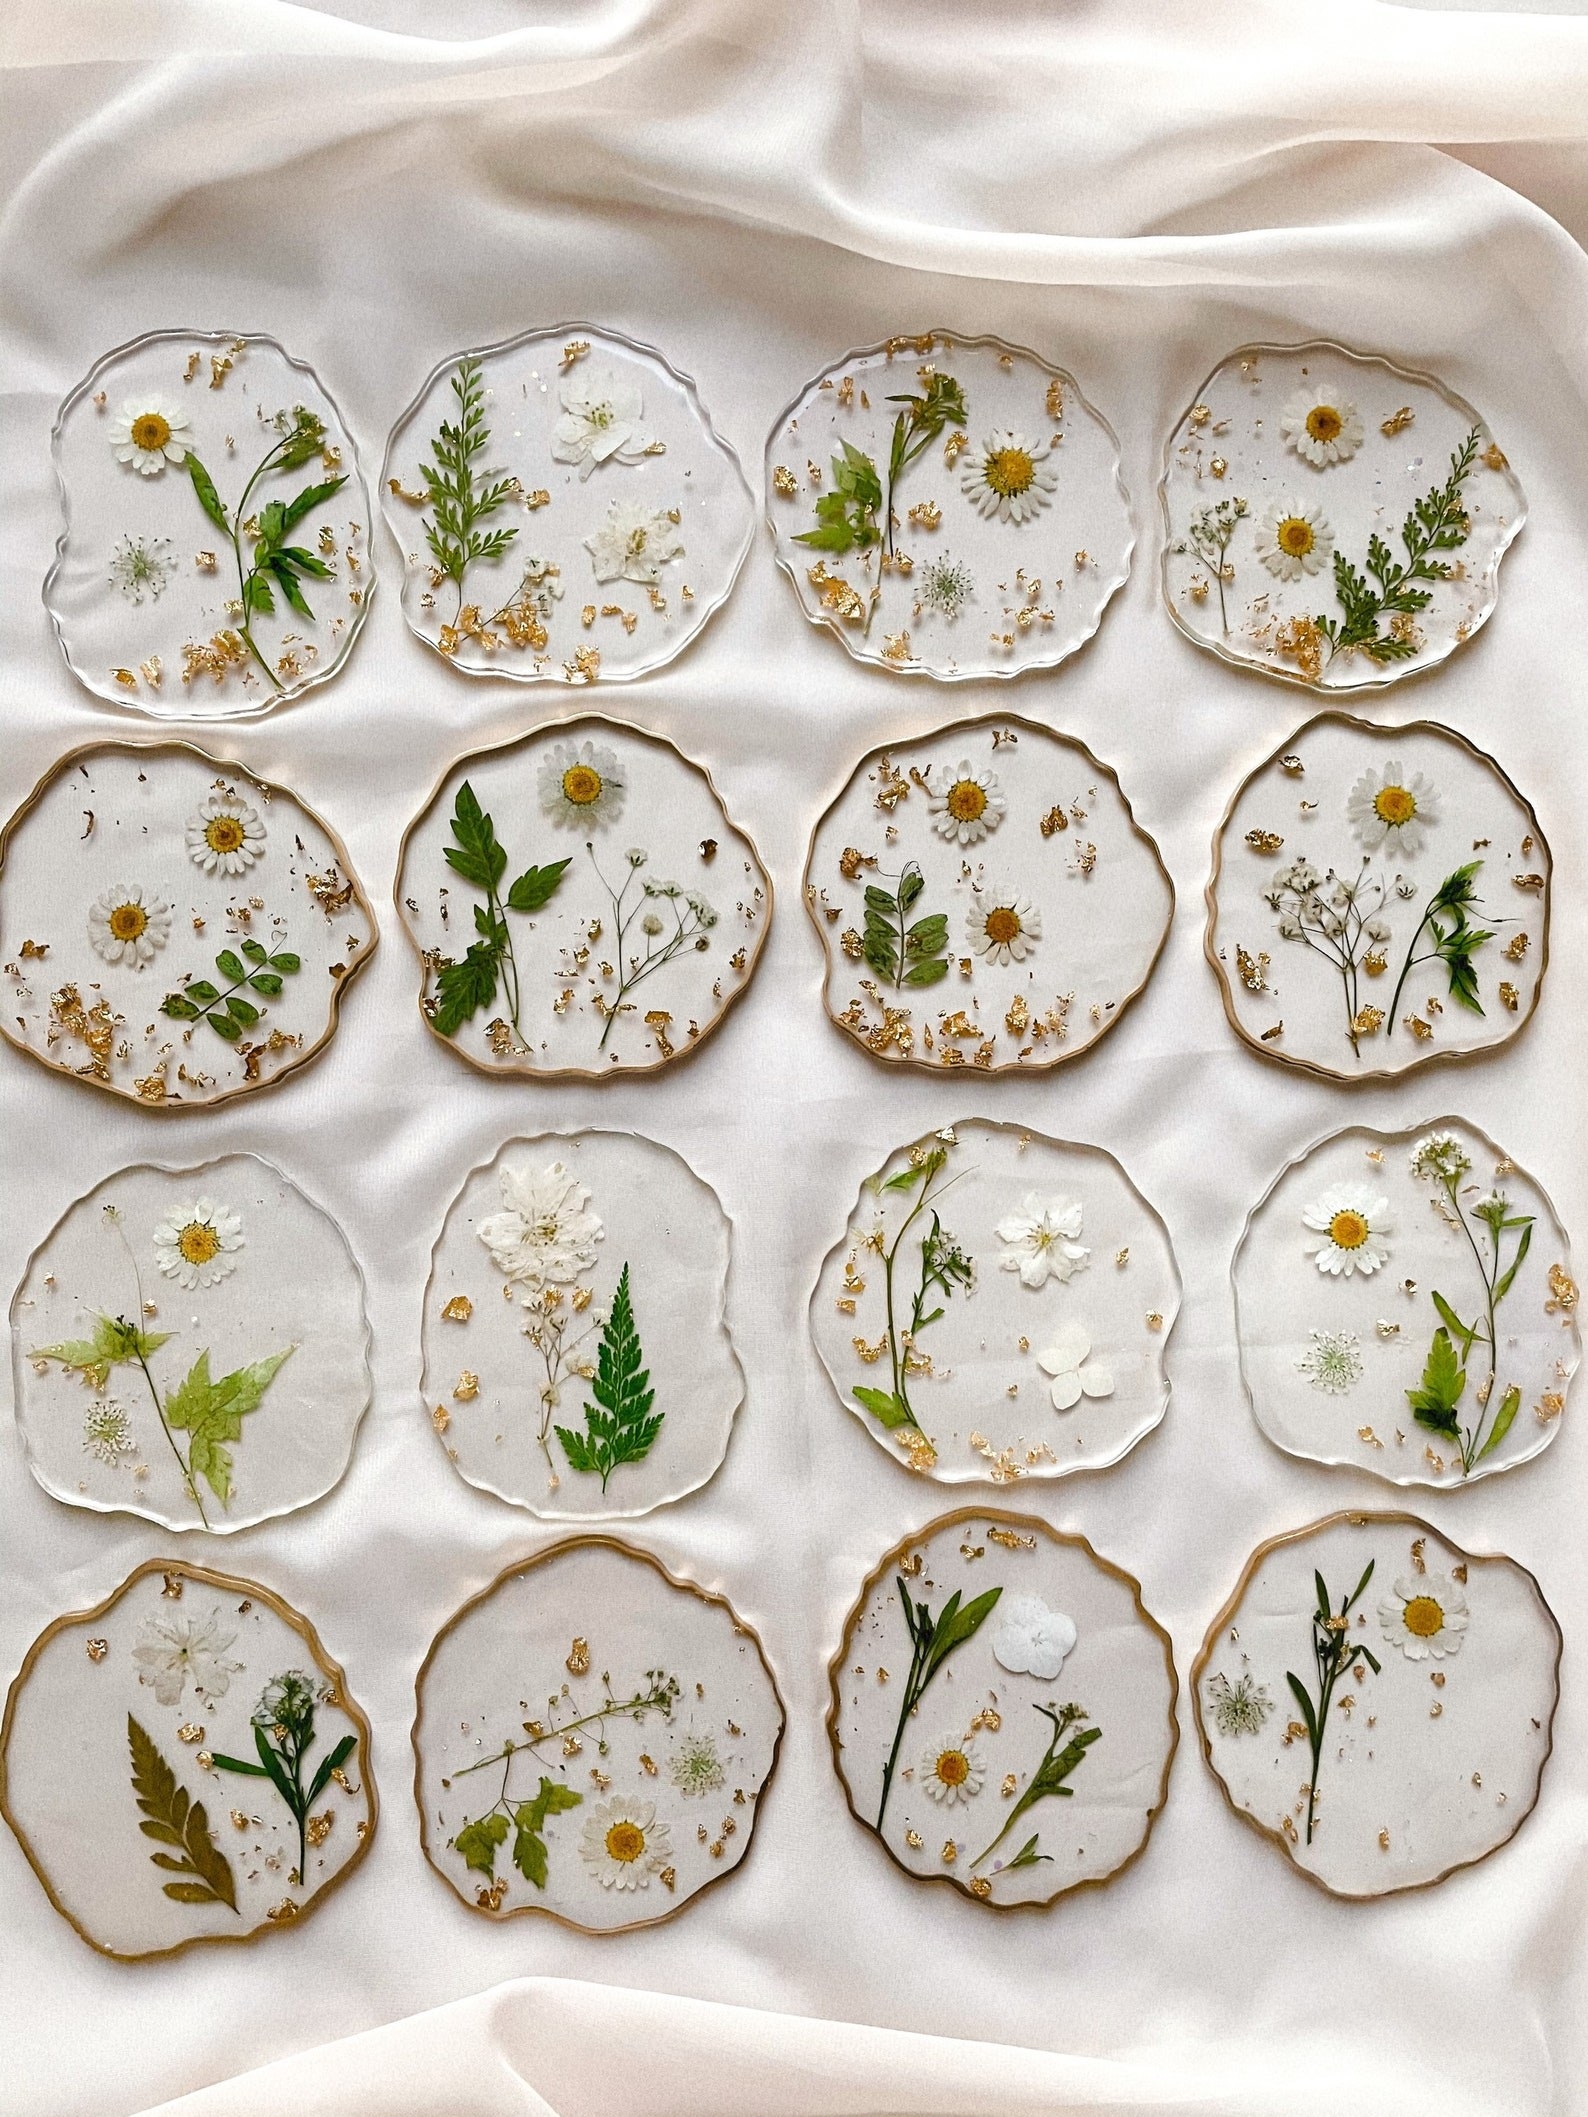 A variety of the floral resin coasters laid out